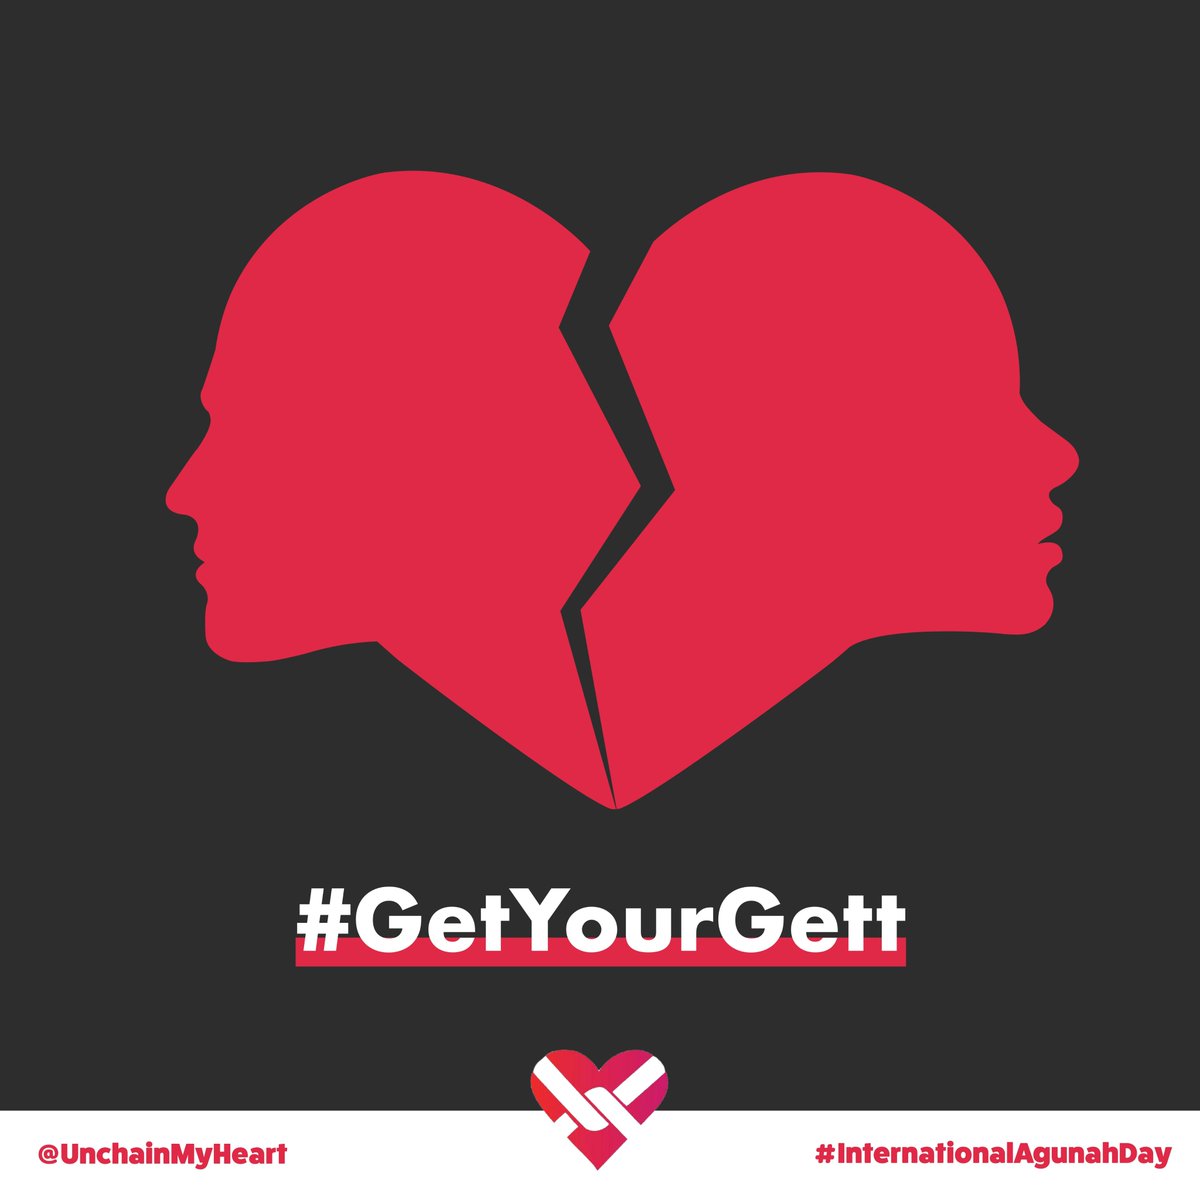 #InternationalAgunahDay In honor of International Agunah Day, Jewish organizations around the world, including Shalom Bayit (shalom-bayit.org), are uniting to provide support and assistance for women needing to get a gett. shalom-bayit.org #UnchainMyHeart